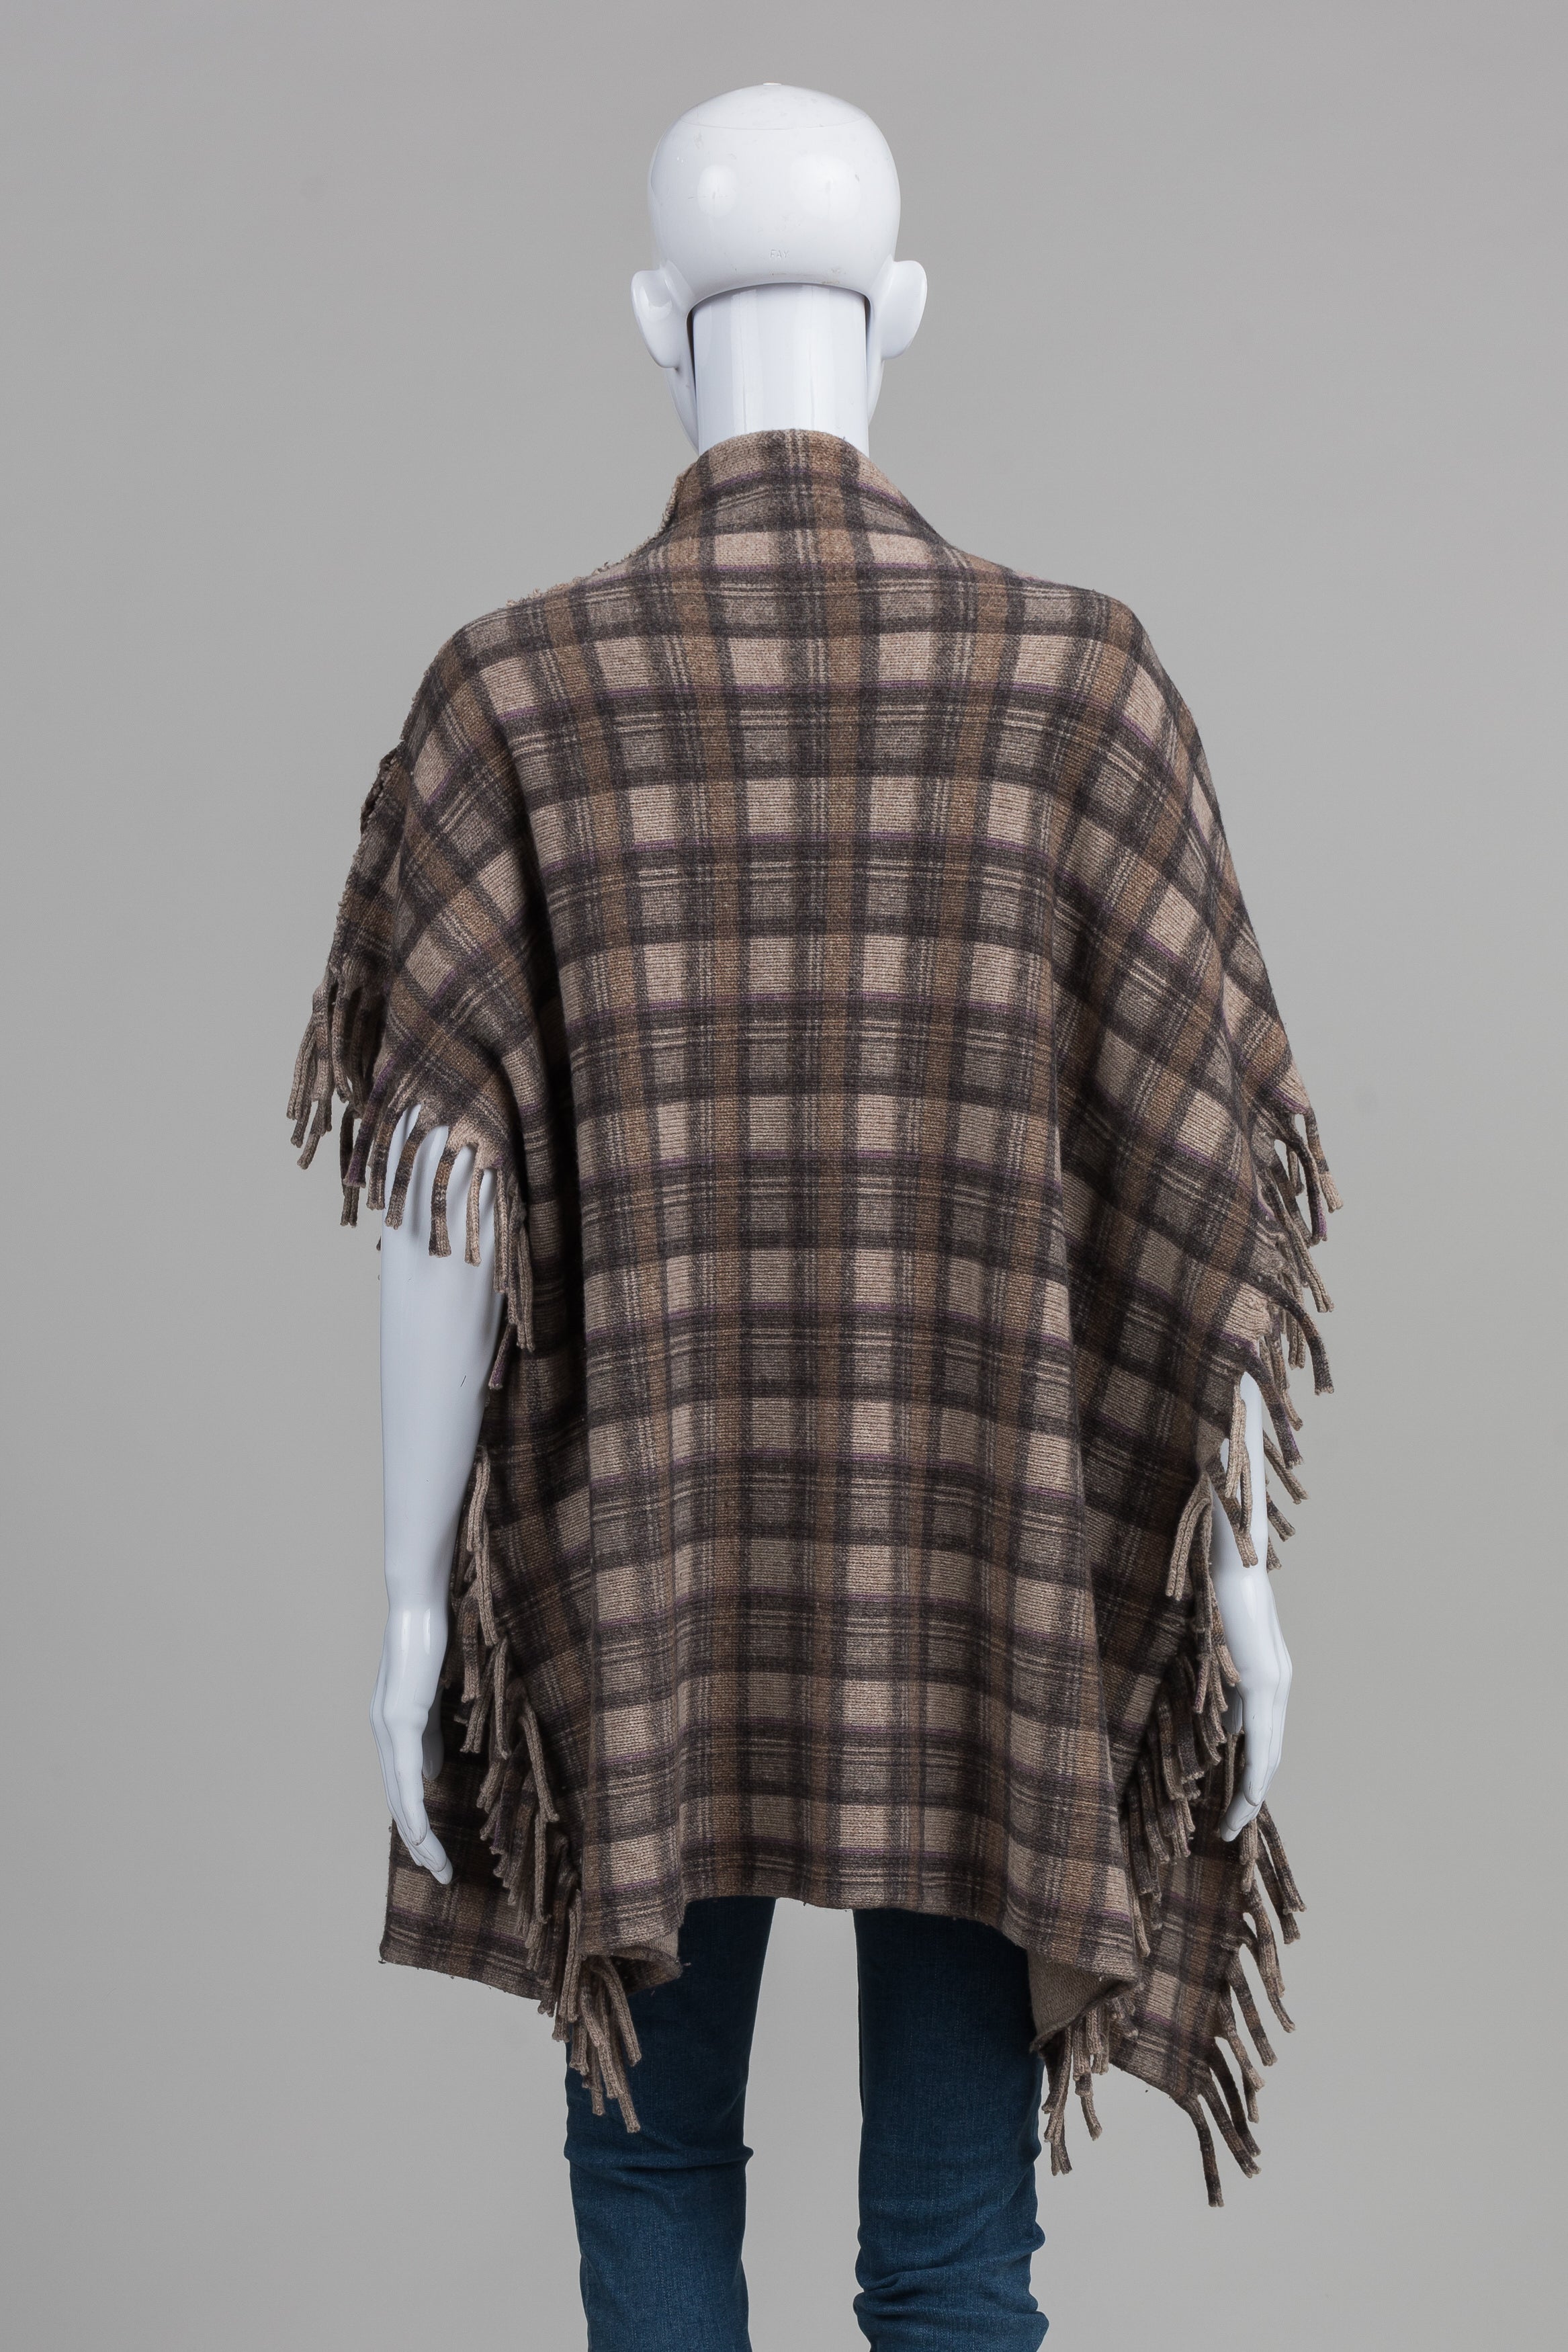 Love Moschino grey, beige, and brown plaid poncho